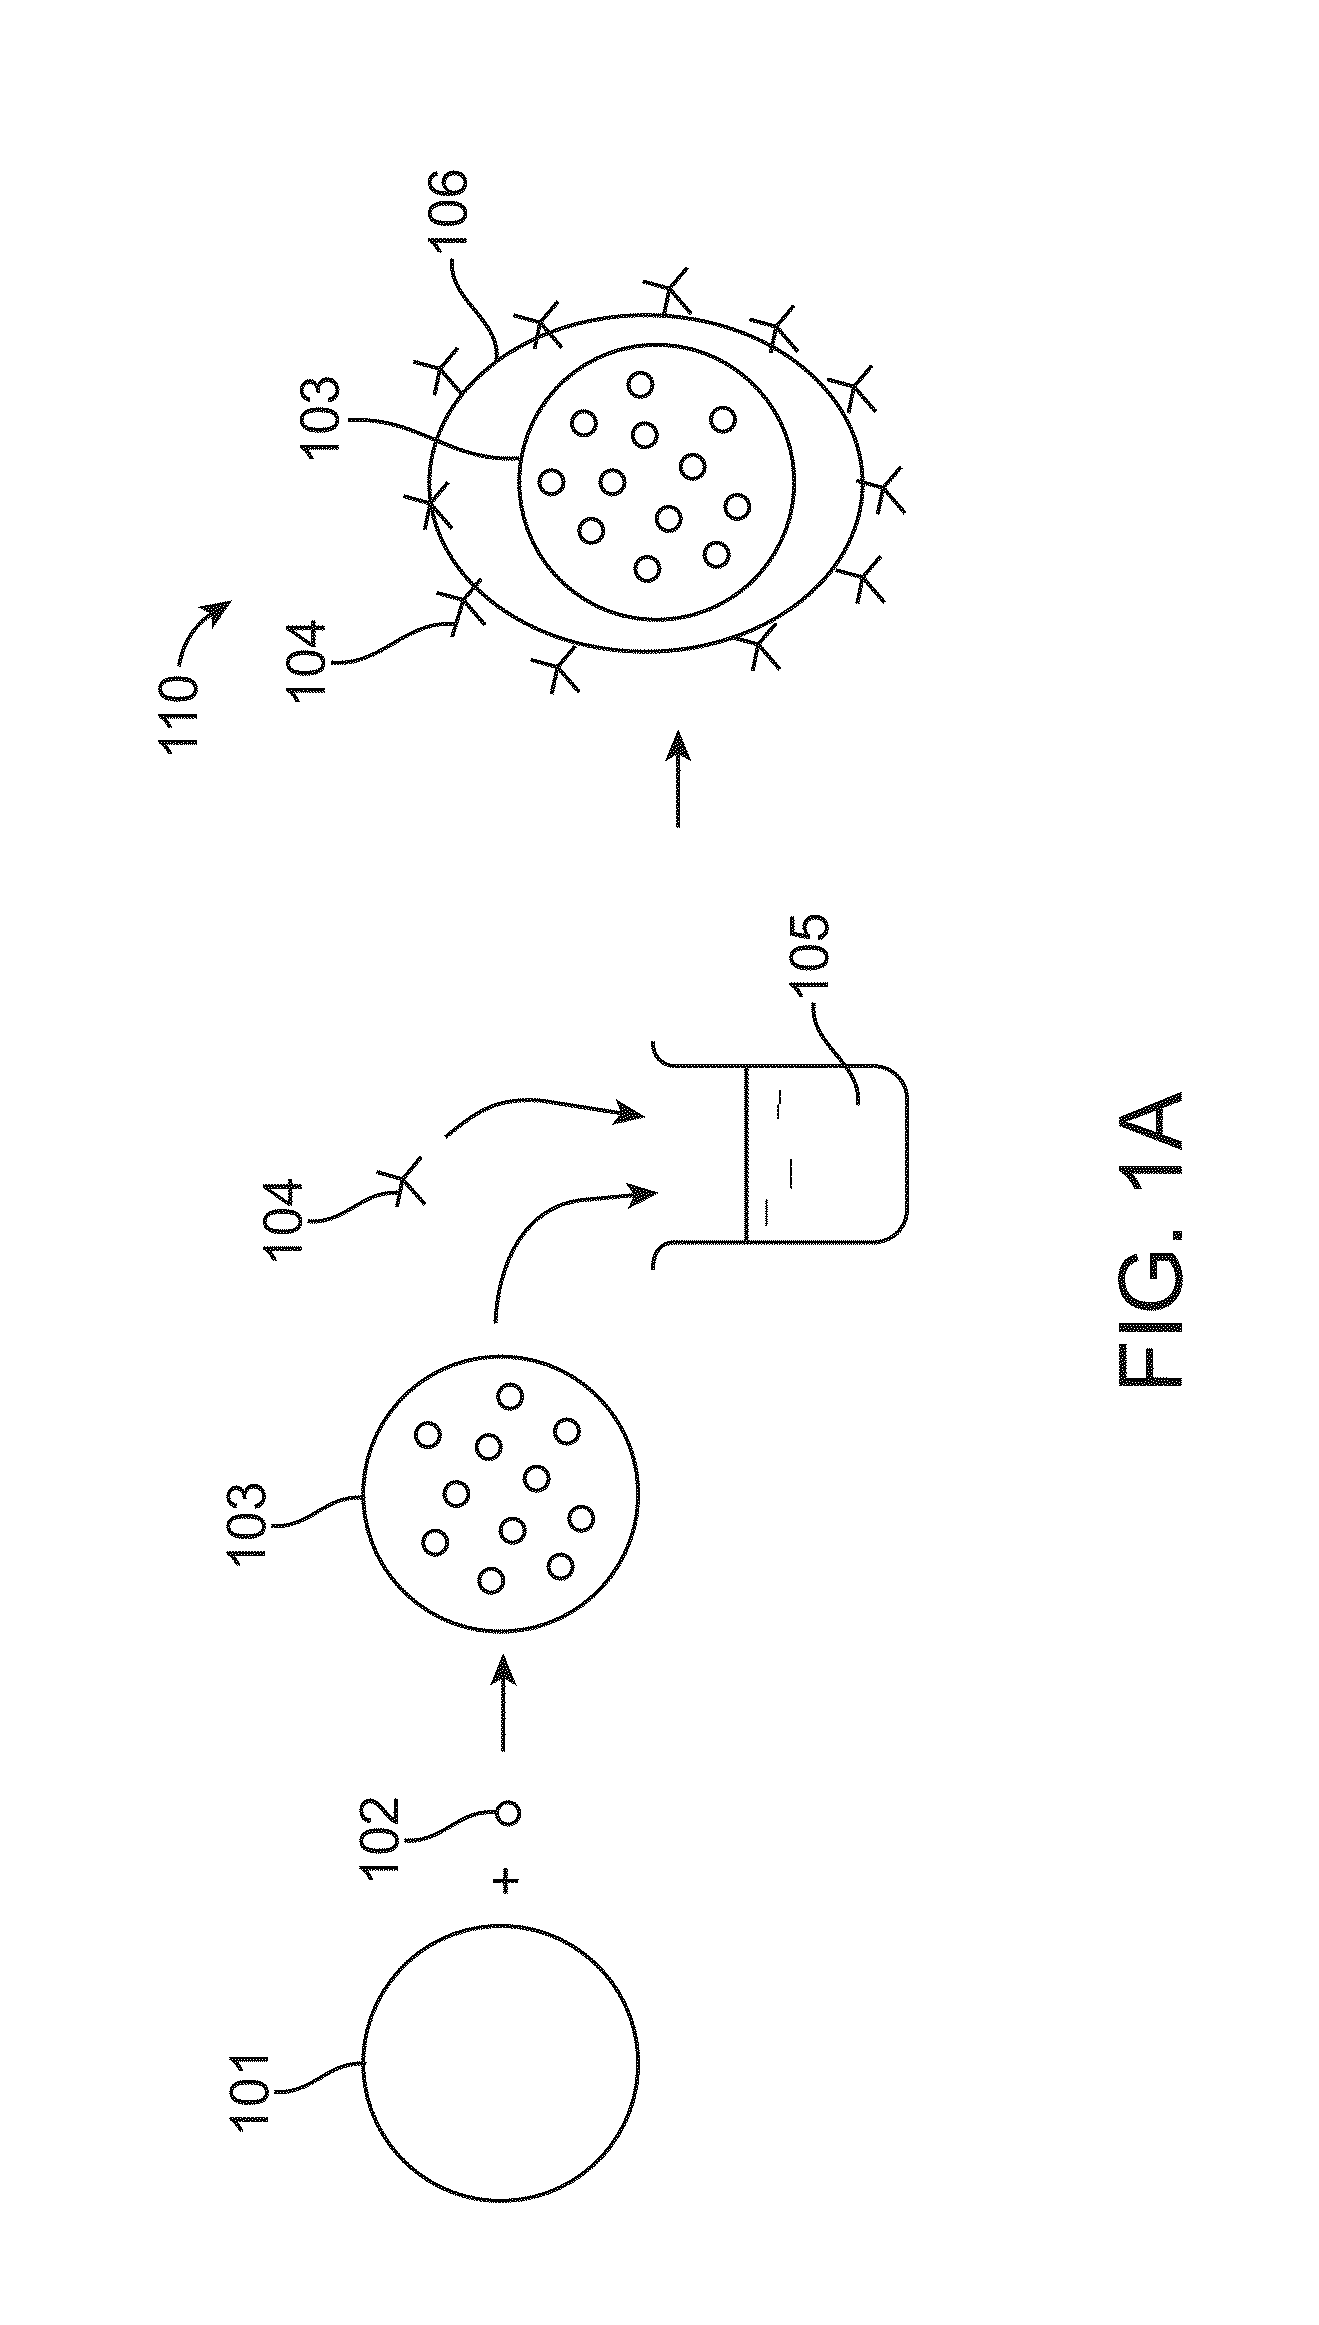 Core-shell particle formulation for delivering multiple therapeutic agents